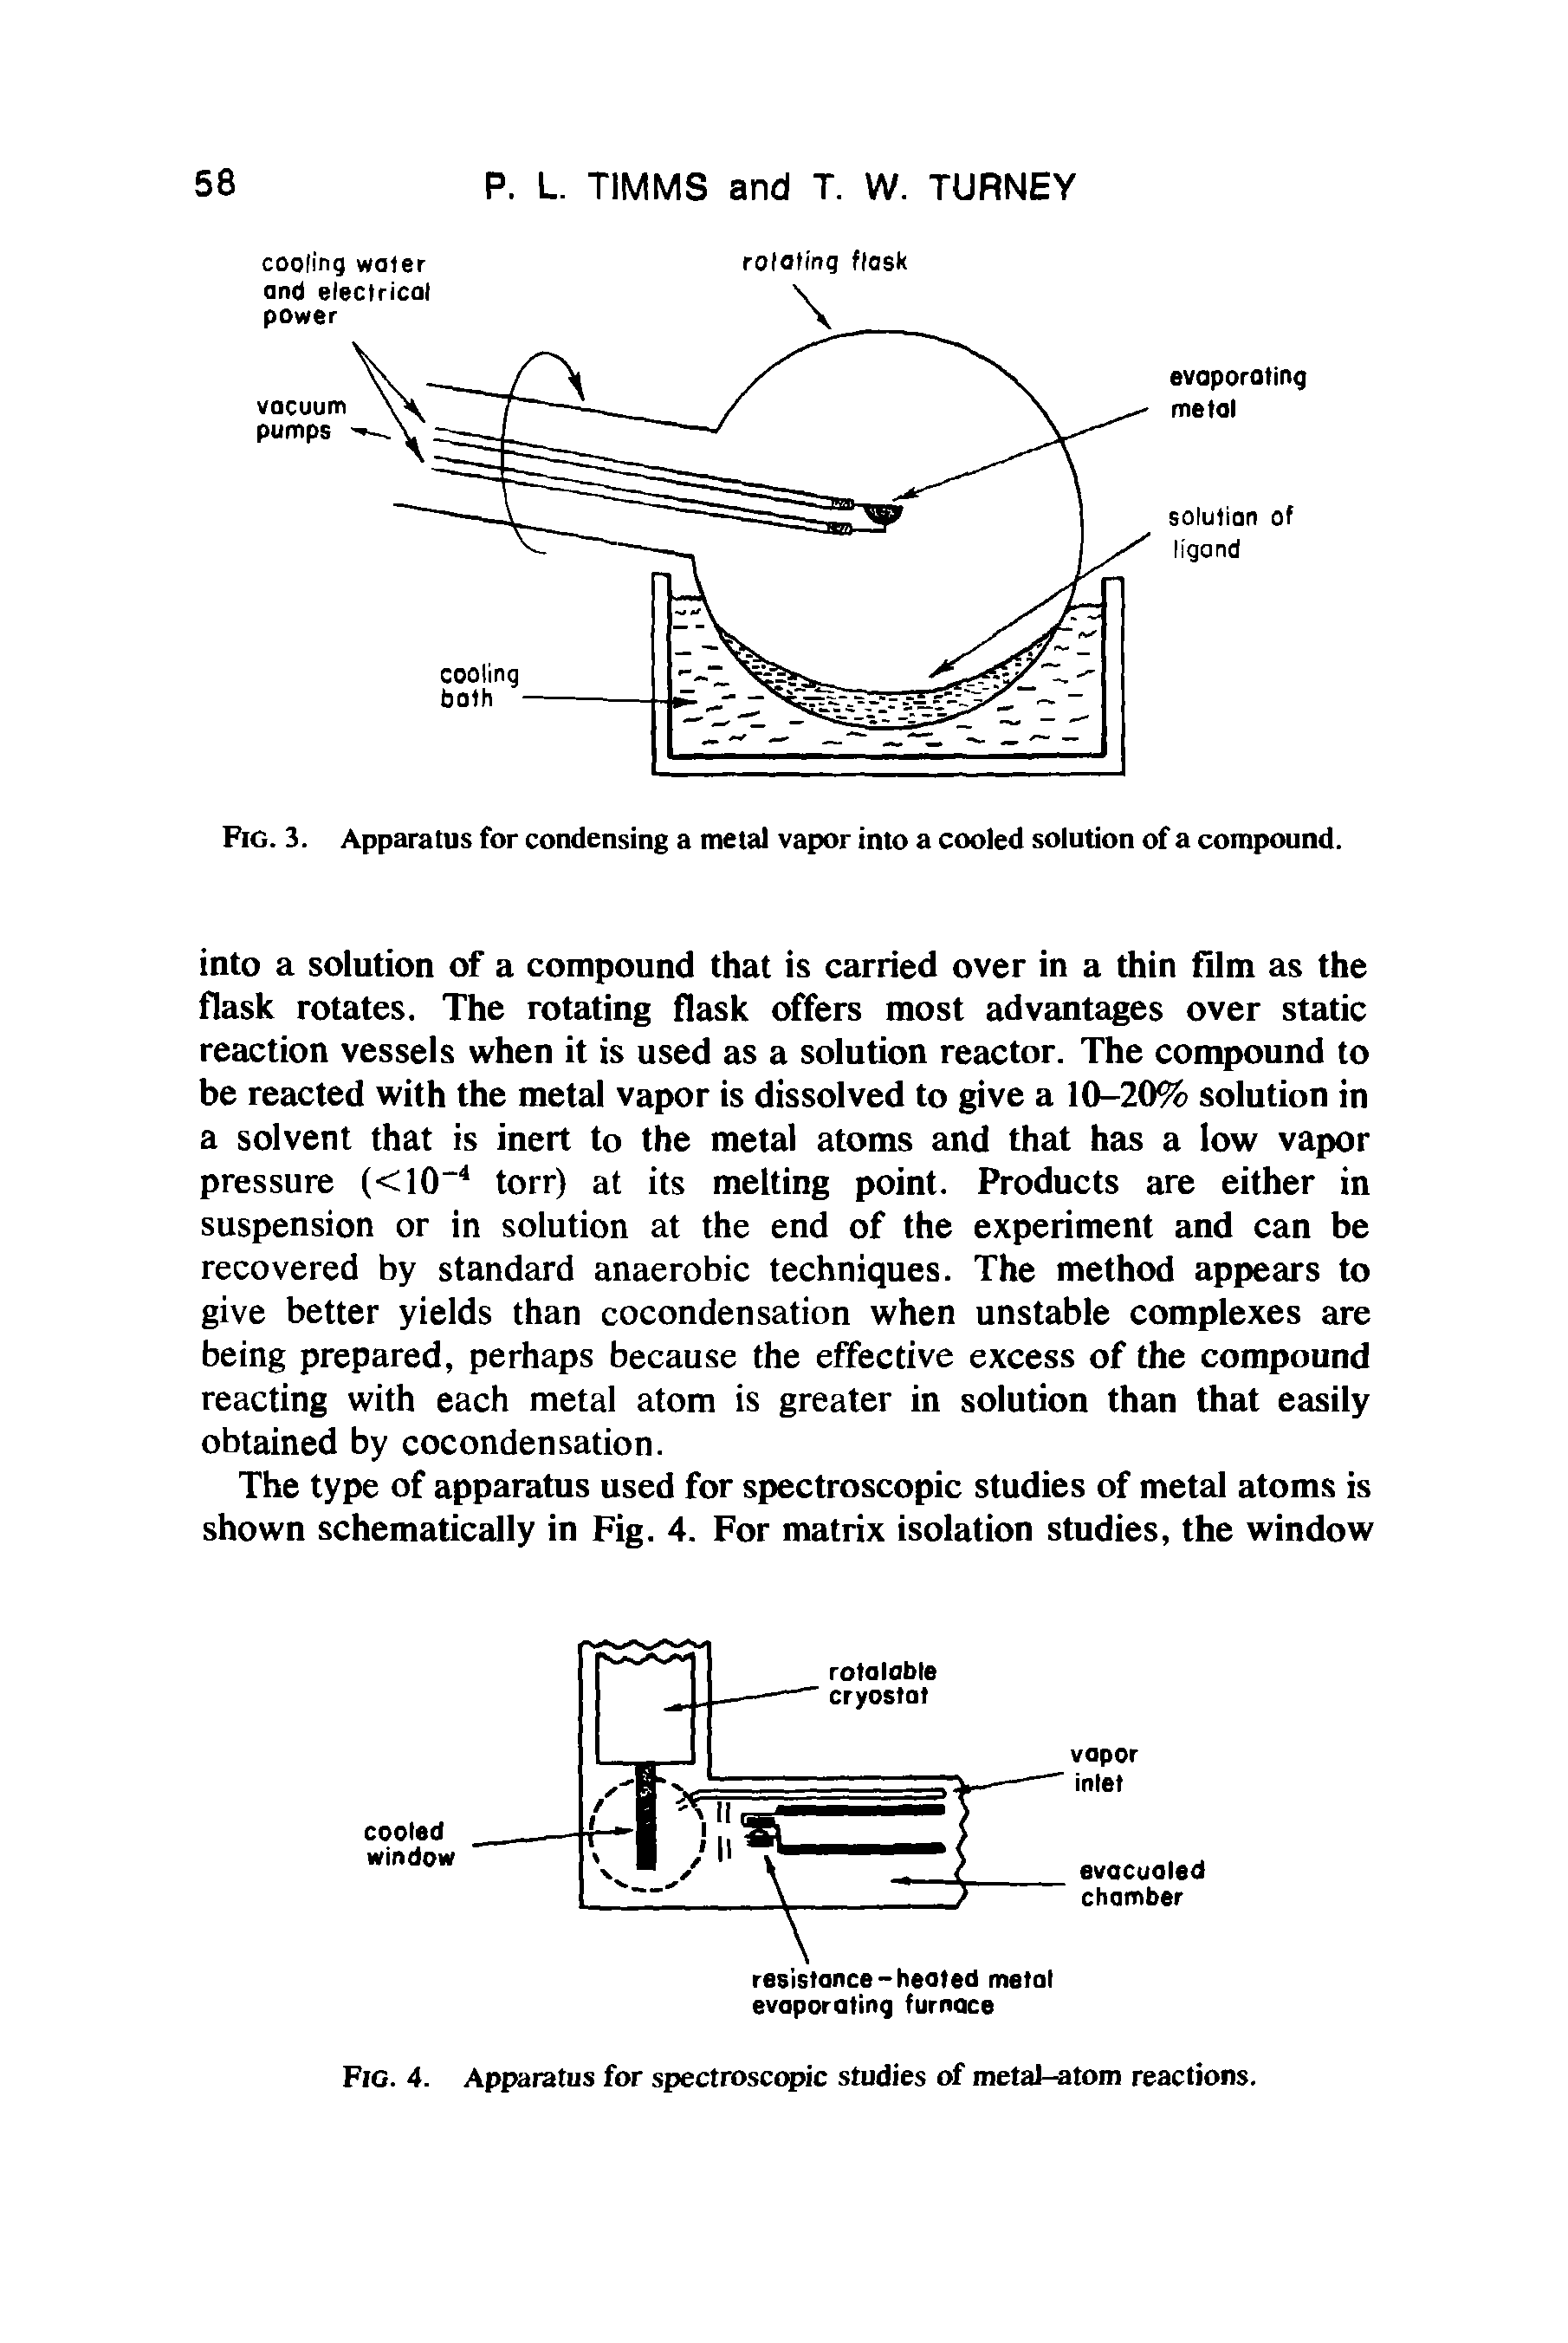 Fig. 4. Apparatus for spectroscopic studies of metal-atom reactions.